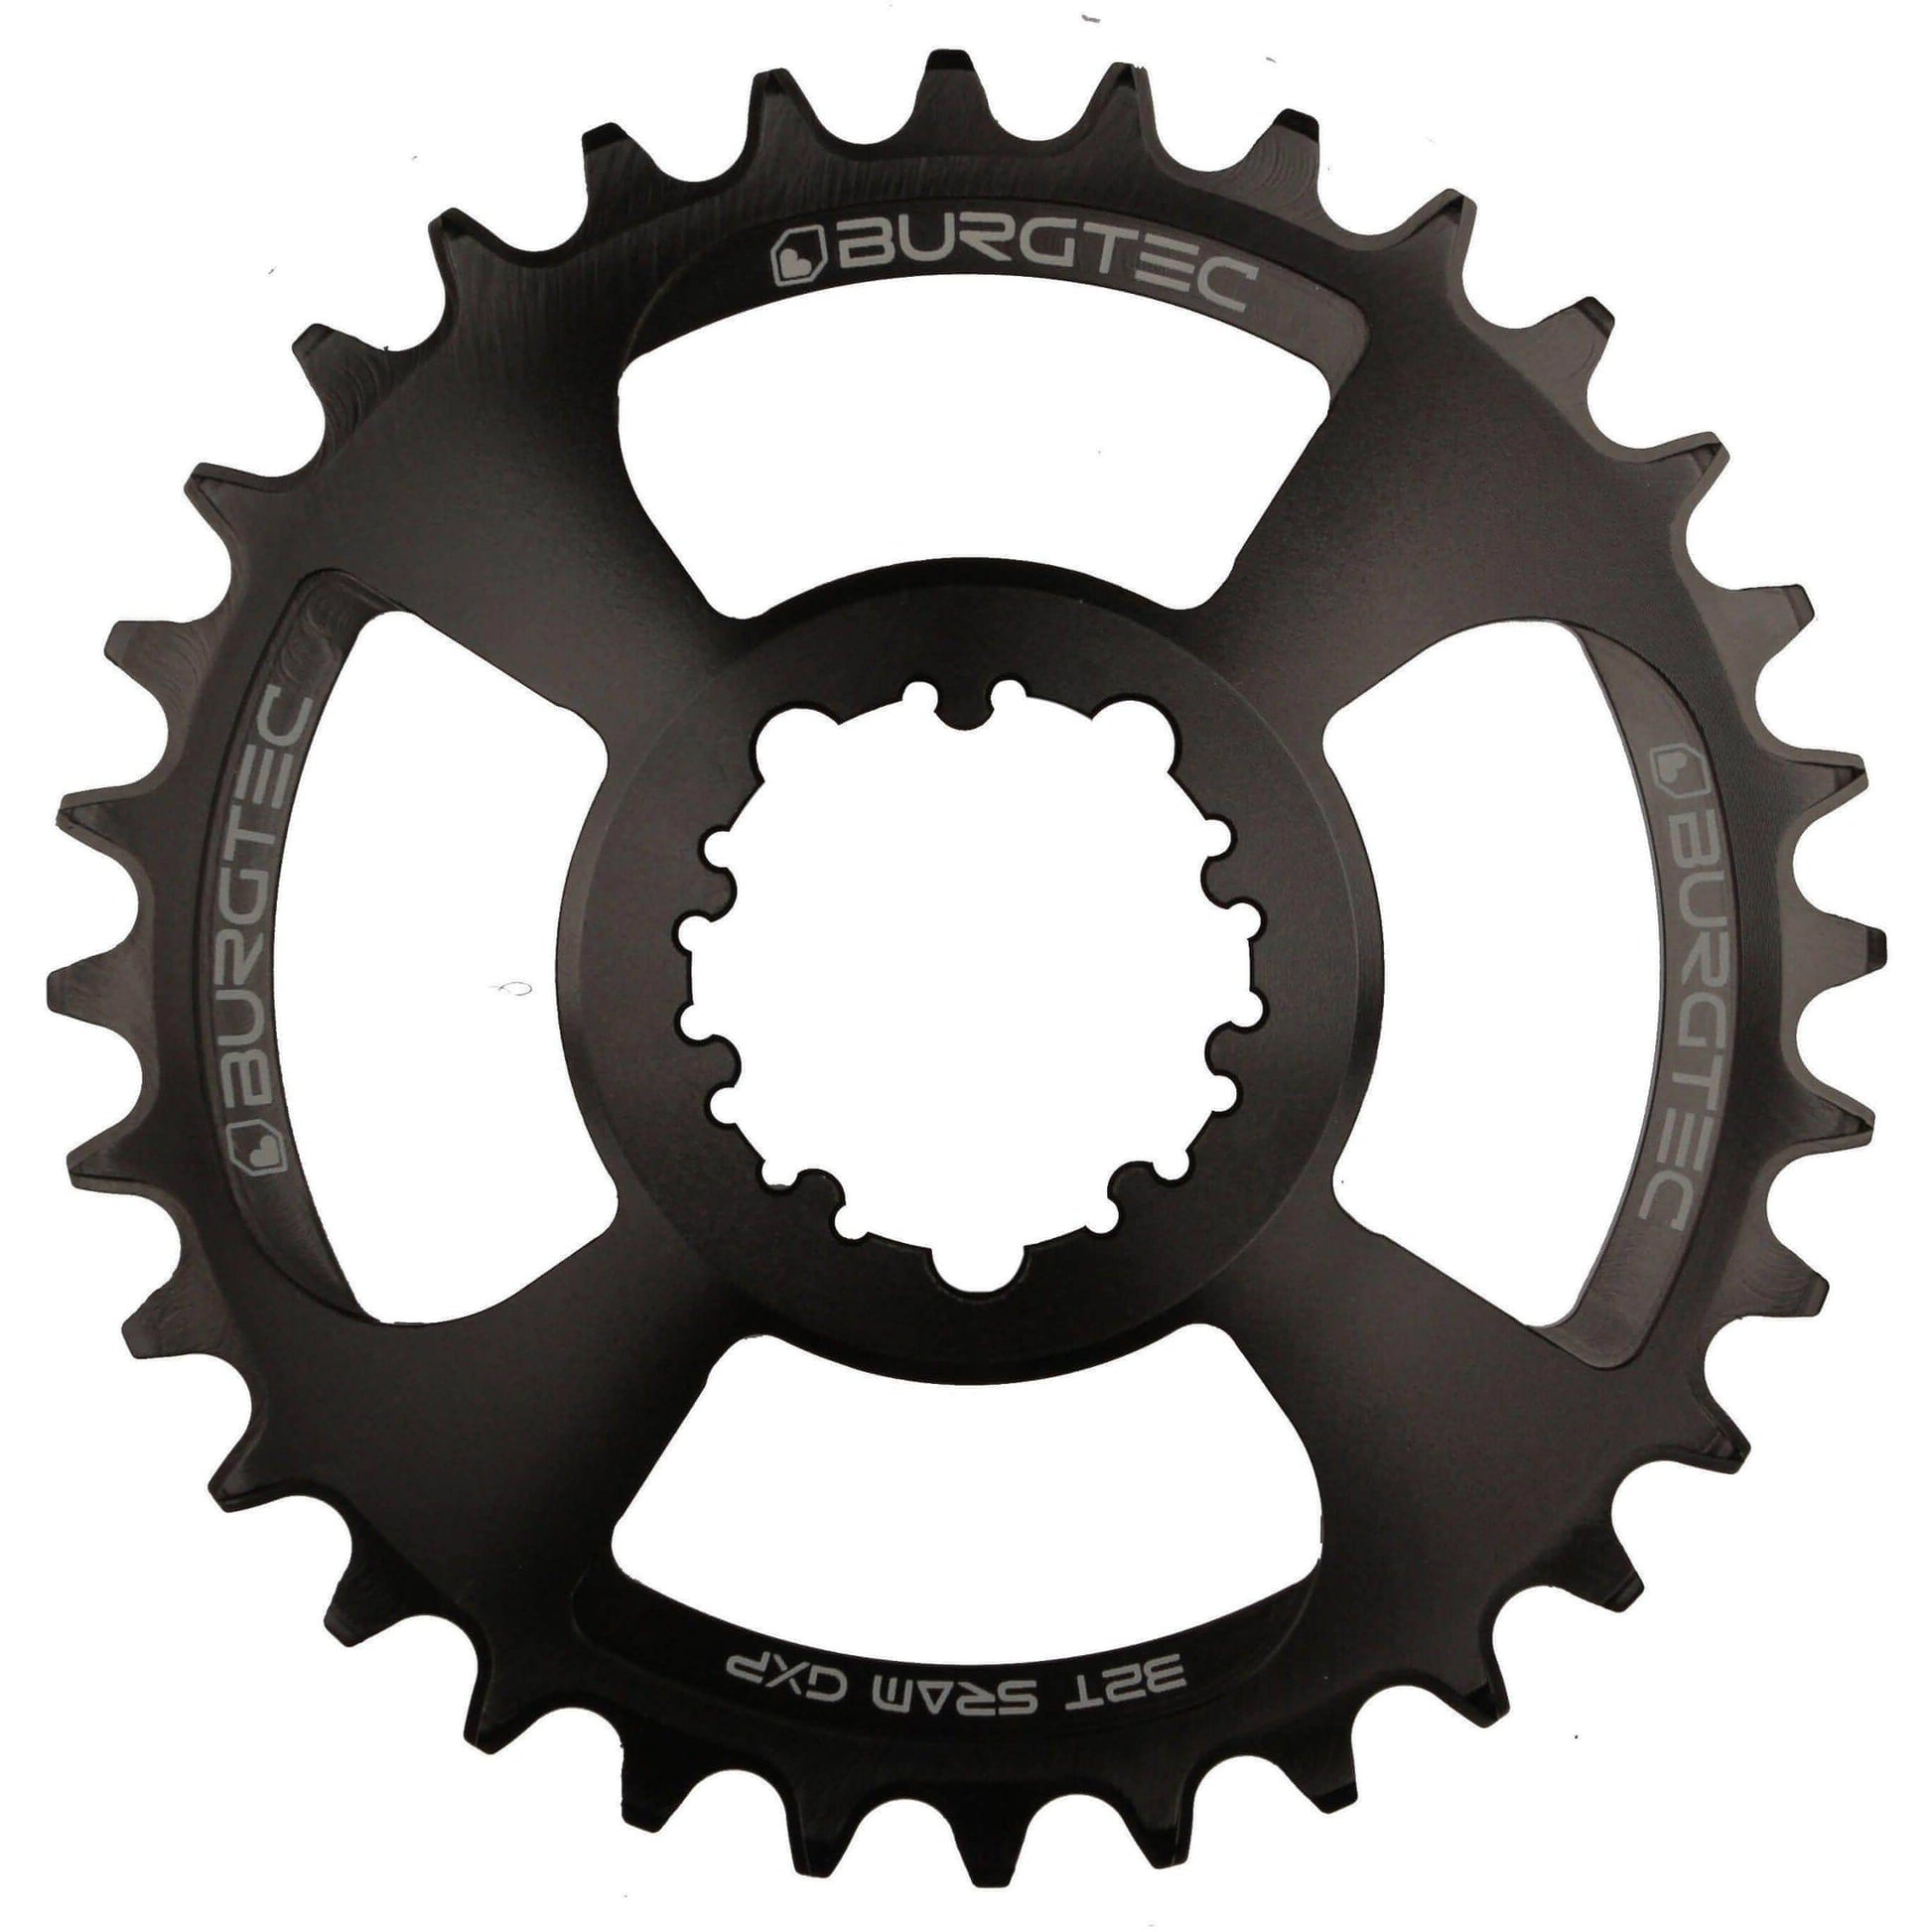 Burgtec GXP 6MM Offset Thick Thin Chainring - Black 713830992307 - Start Fitness